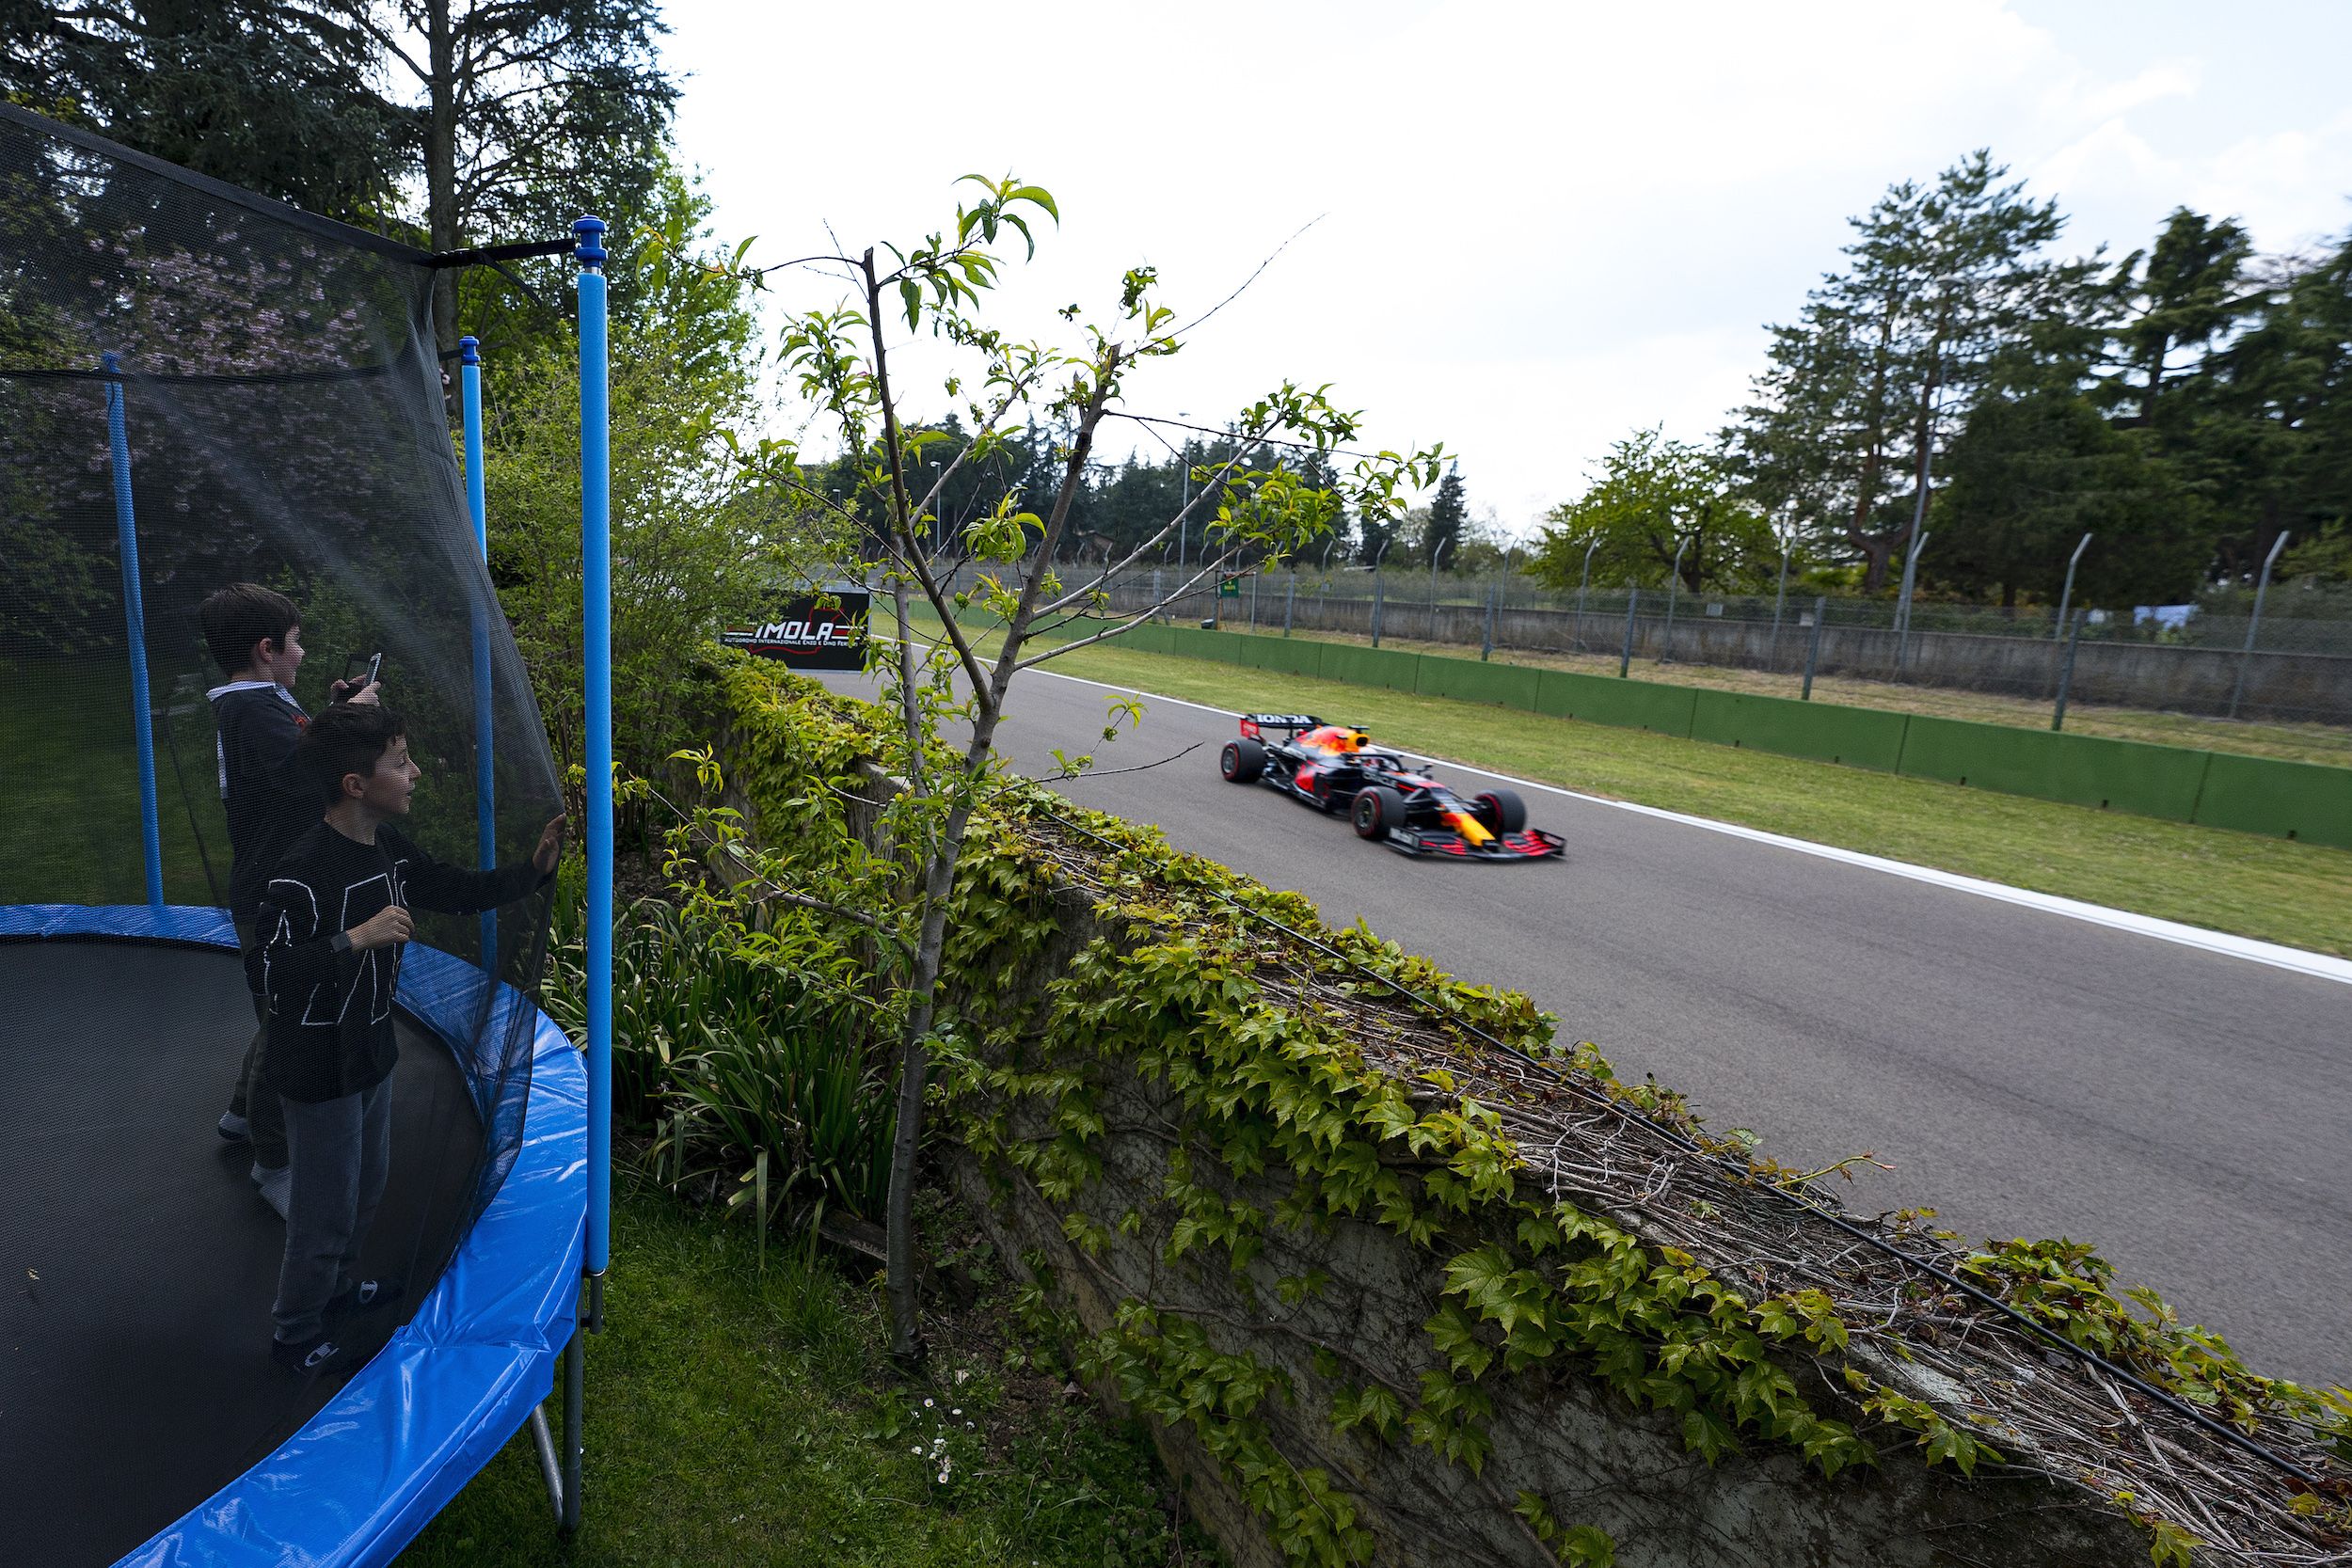 This Trampoline Was the Best Place to Watch the Imola Grand Prix